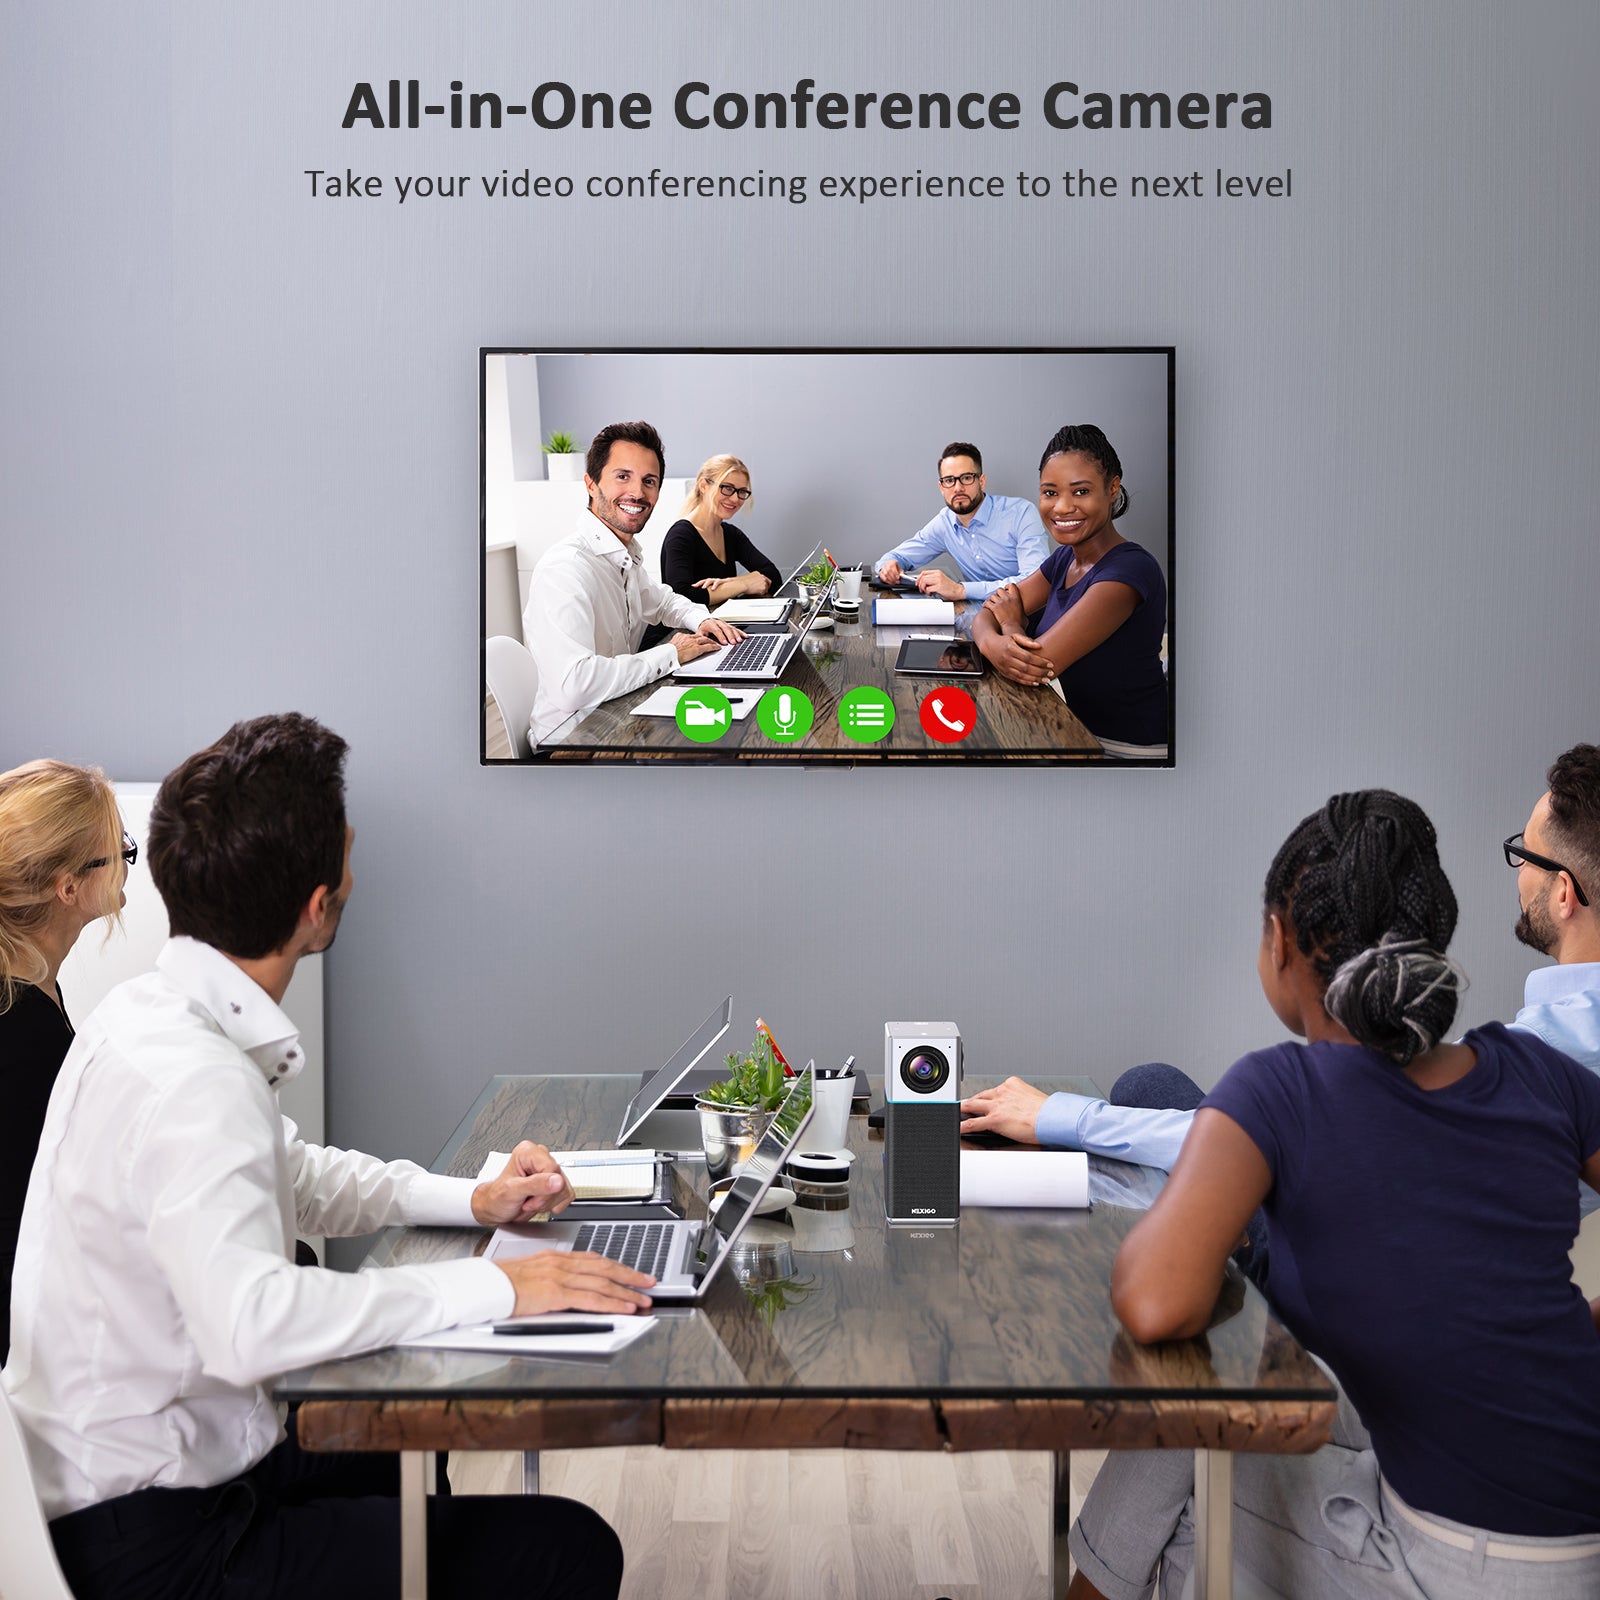 A team of four is using the All-in-One Conference Camera for video meetings.